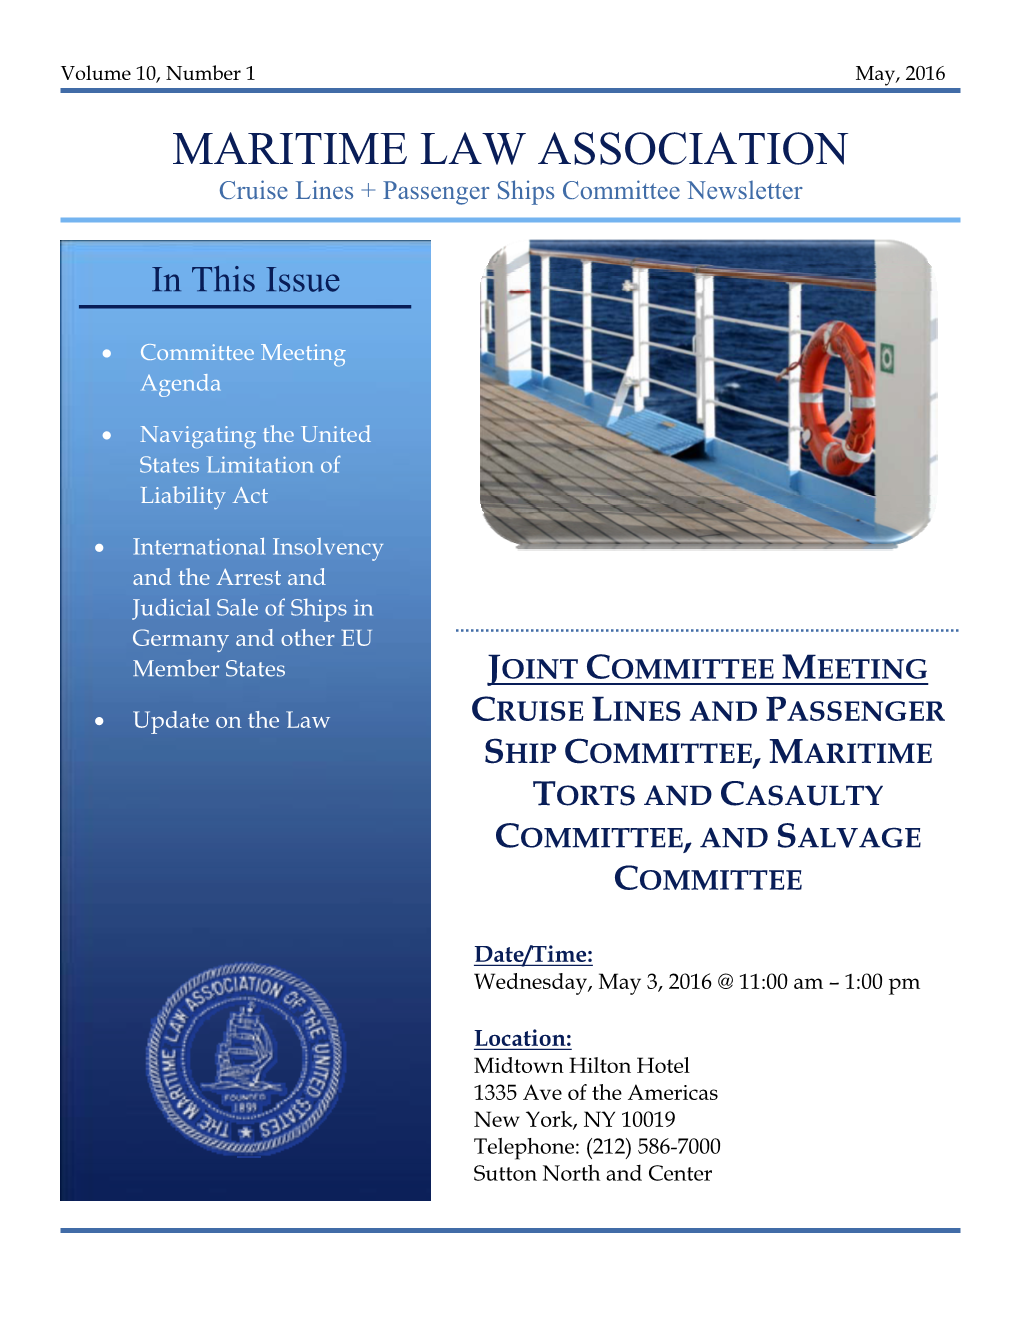 MARITIME LAW ASSOCIATION Cruise Lines + Passenger Ships Committee Newsletter